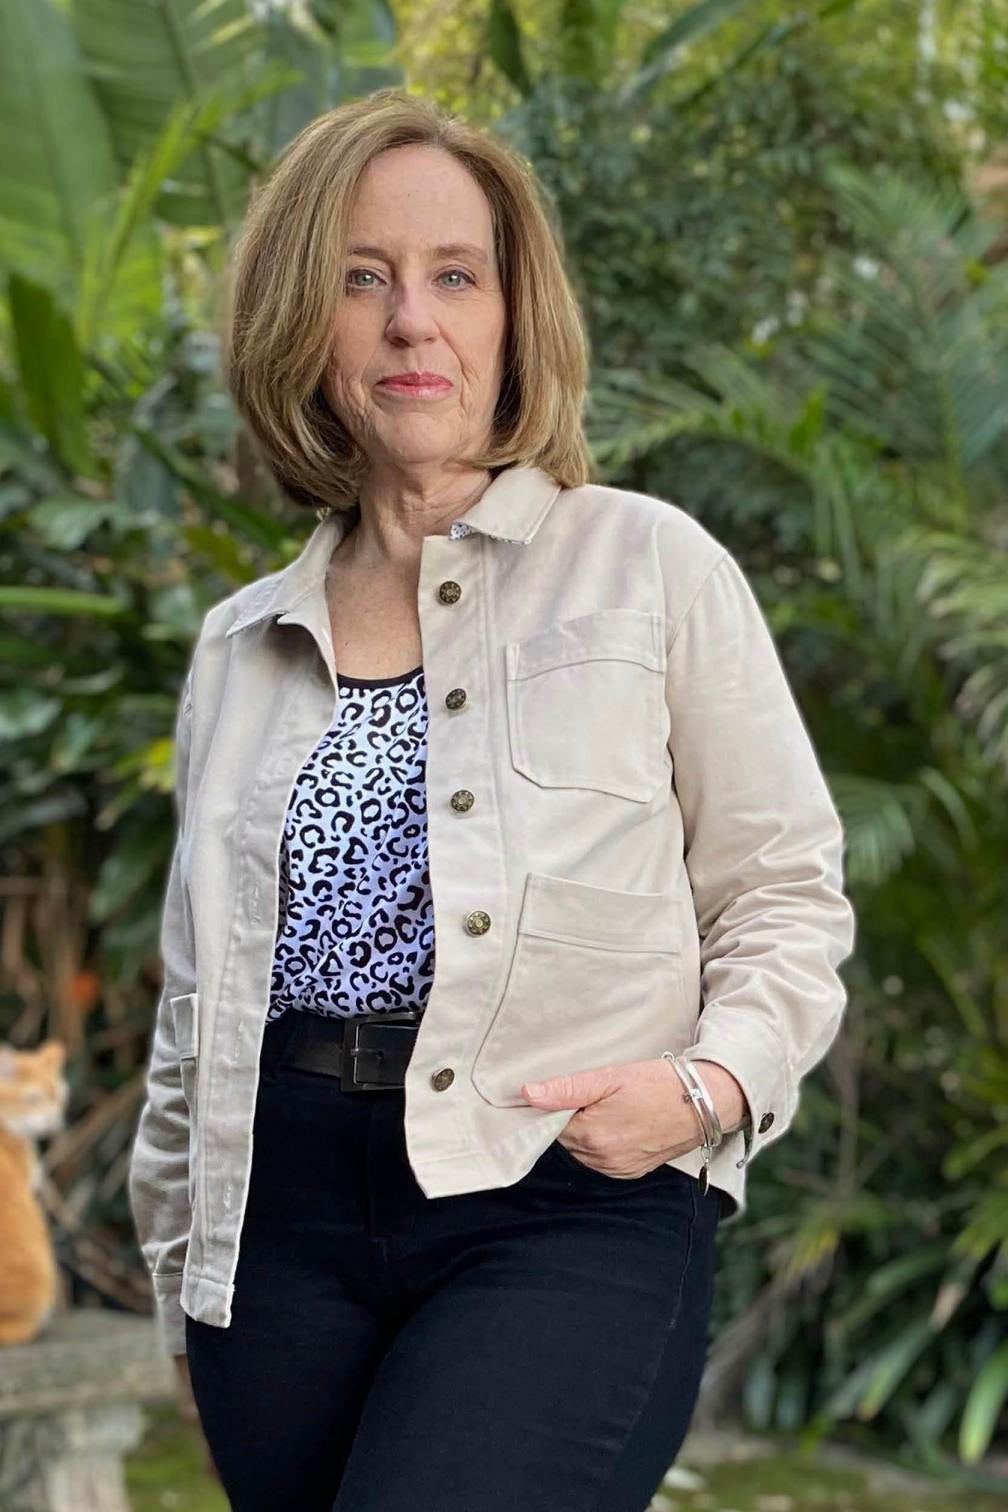 Woman wearing Canvas Jacket sewing pattern from Wardrobe by Me on The Fold Line. A jacket pattern made in canvas, denim, corduroy, cotton drill, linen or wool fabrics, featuring a boxy fit, two-piece sleeves, 3 patch pockets, yoke, collar, front button cl